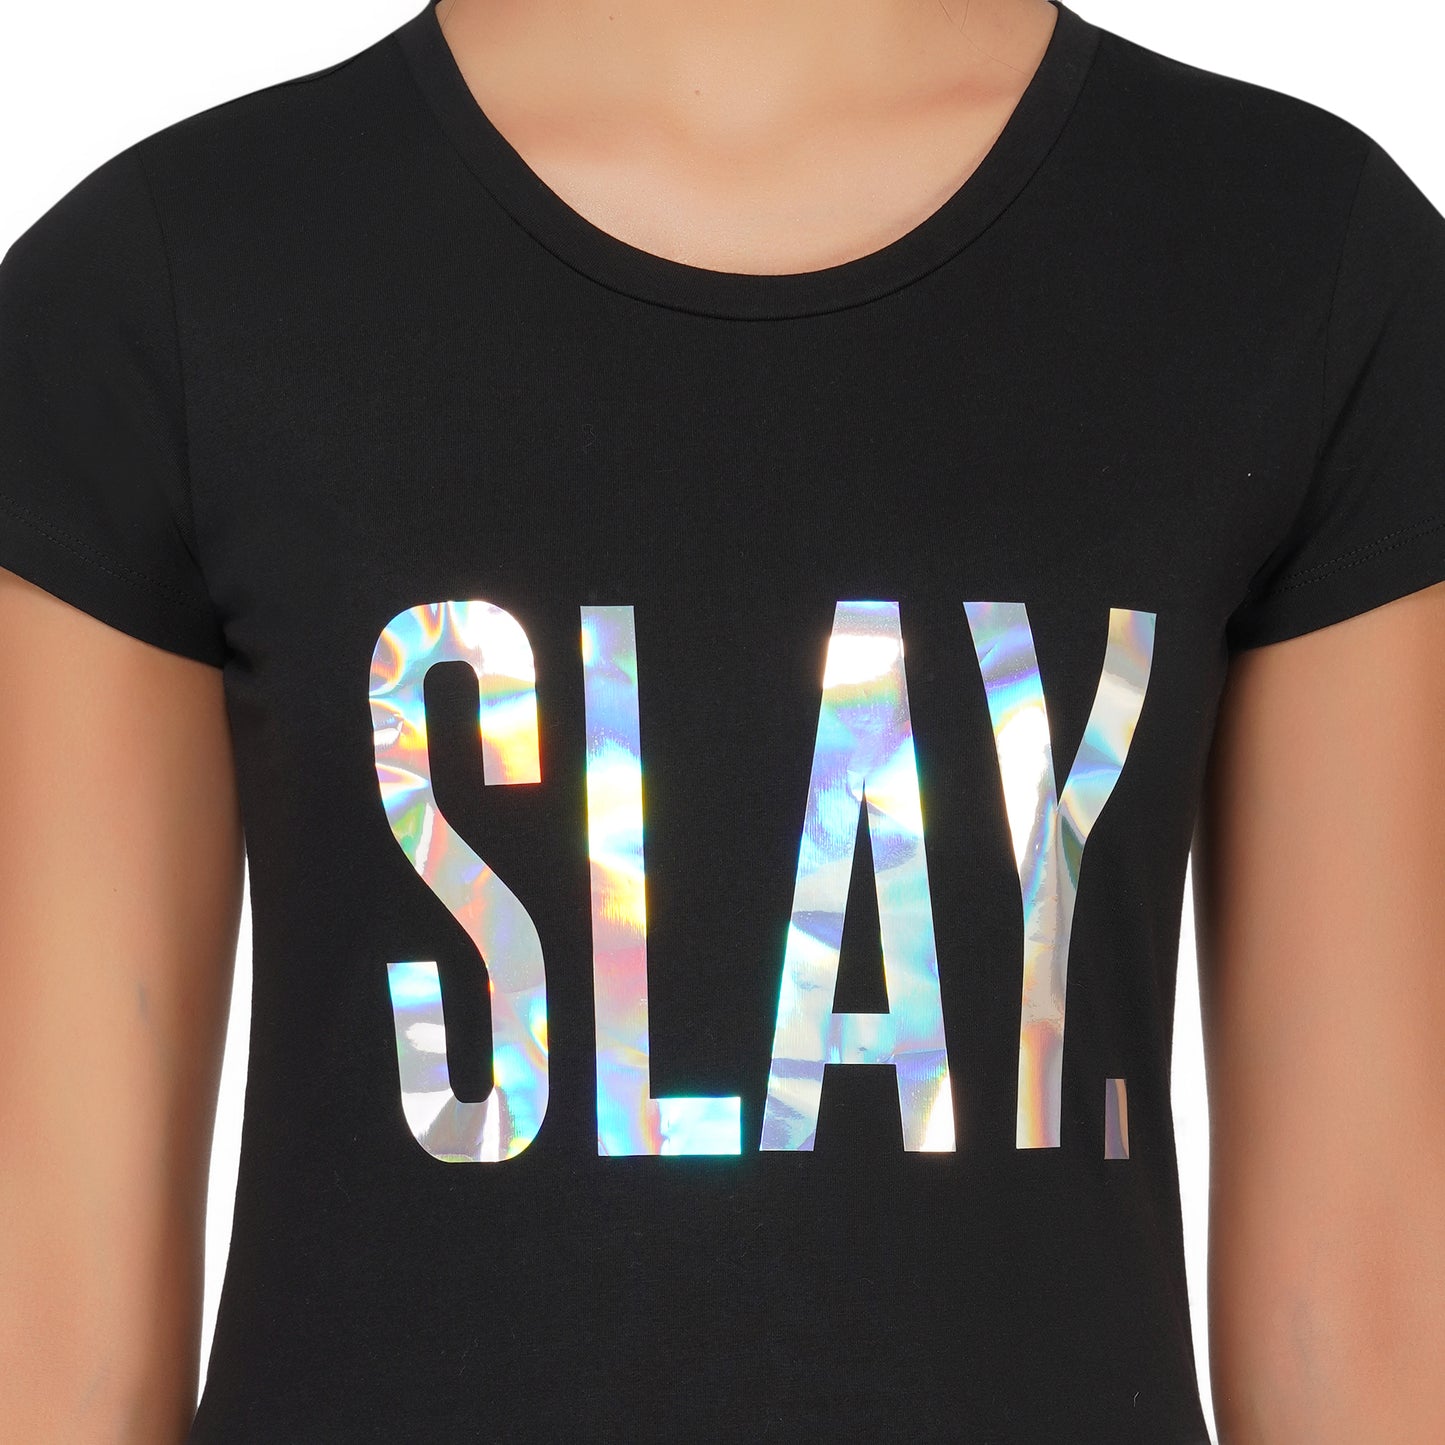 SLAY. Women's Limited Edition Holographic Reflective Foil Printed T-shirt-clothing-to-slay.myshopify.com-Tshirt